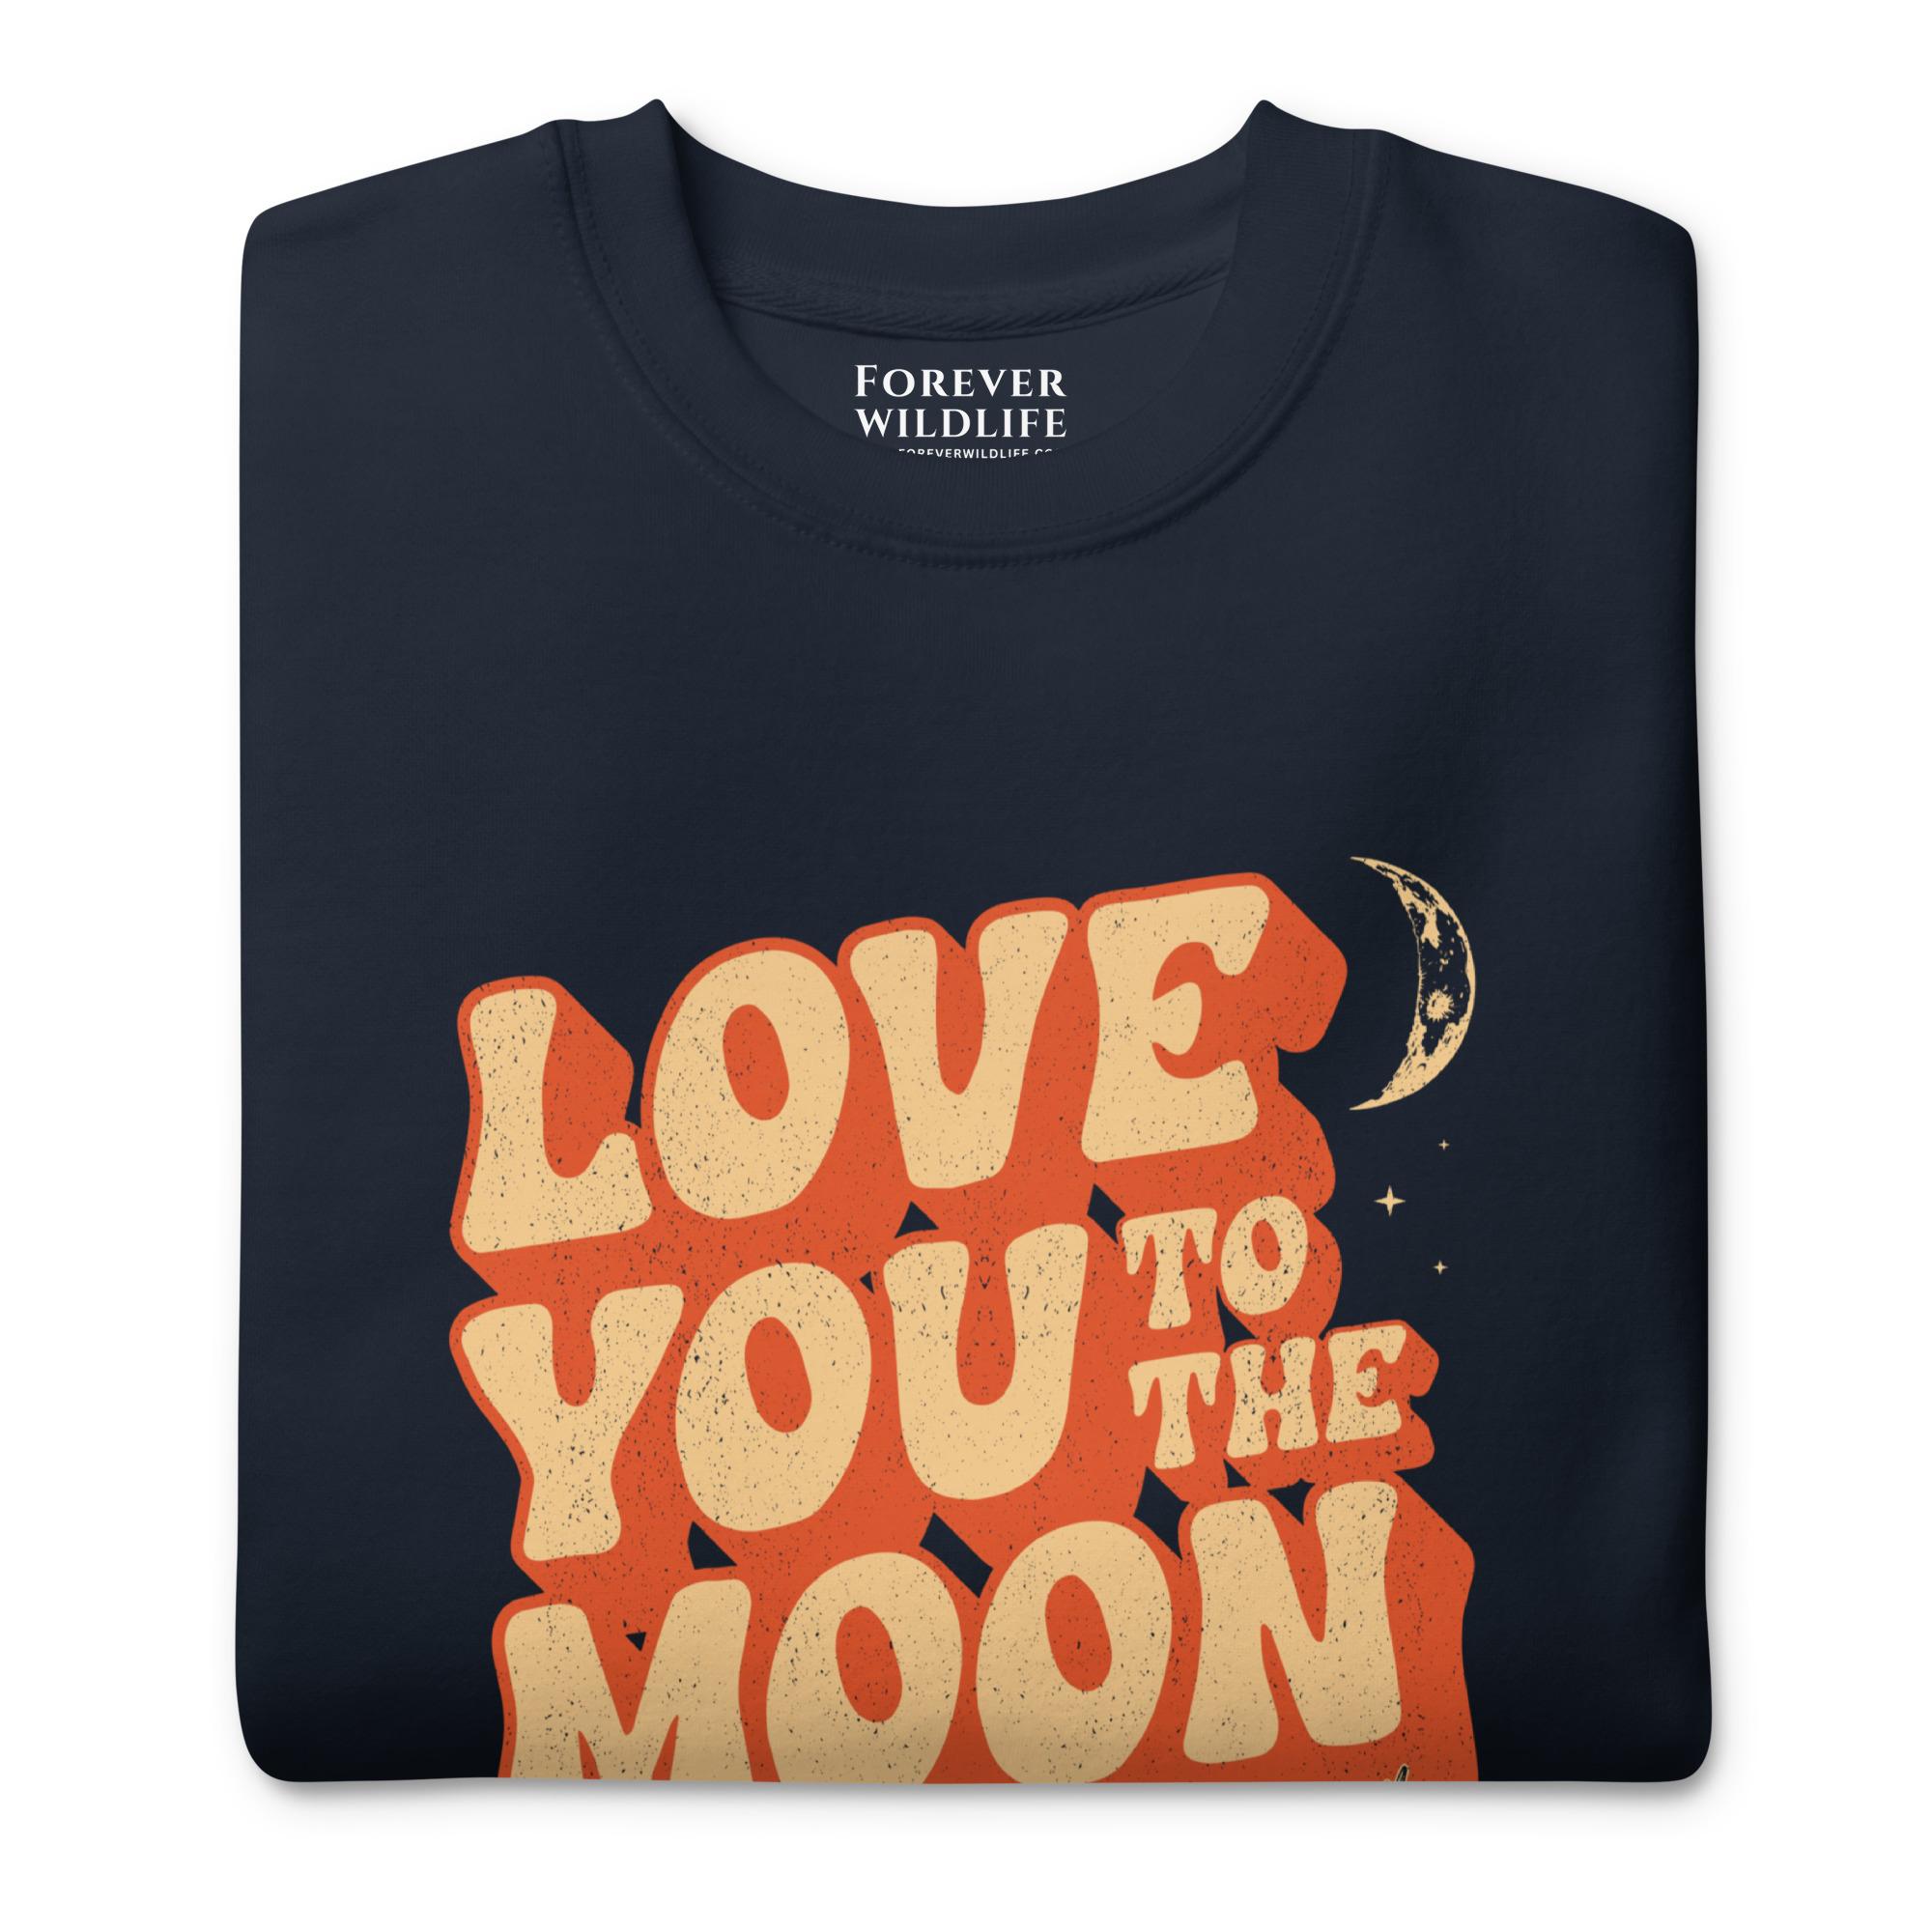  Eagle Sweatshirt in Navy-Premium Wildlife Animal Inspiration Sweatshirt Design with 'Love You To The Moon' text, part of Wildlife Sweatshirts & Clothing from Forever Wildlife.